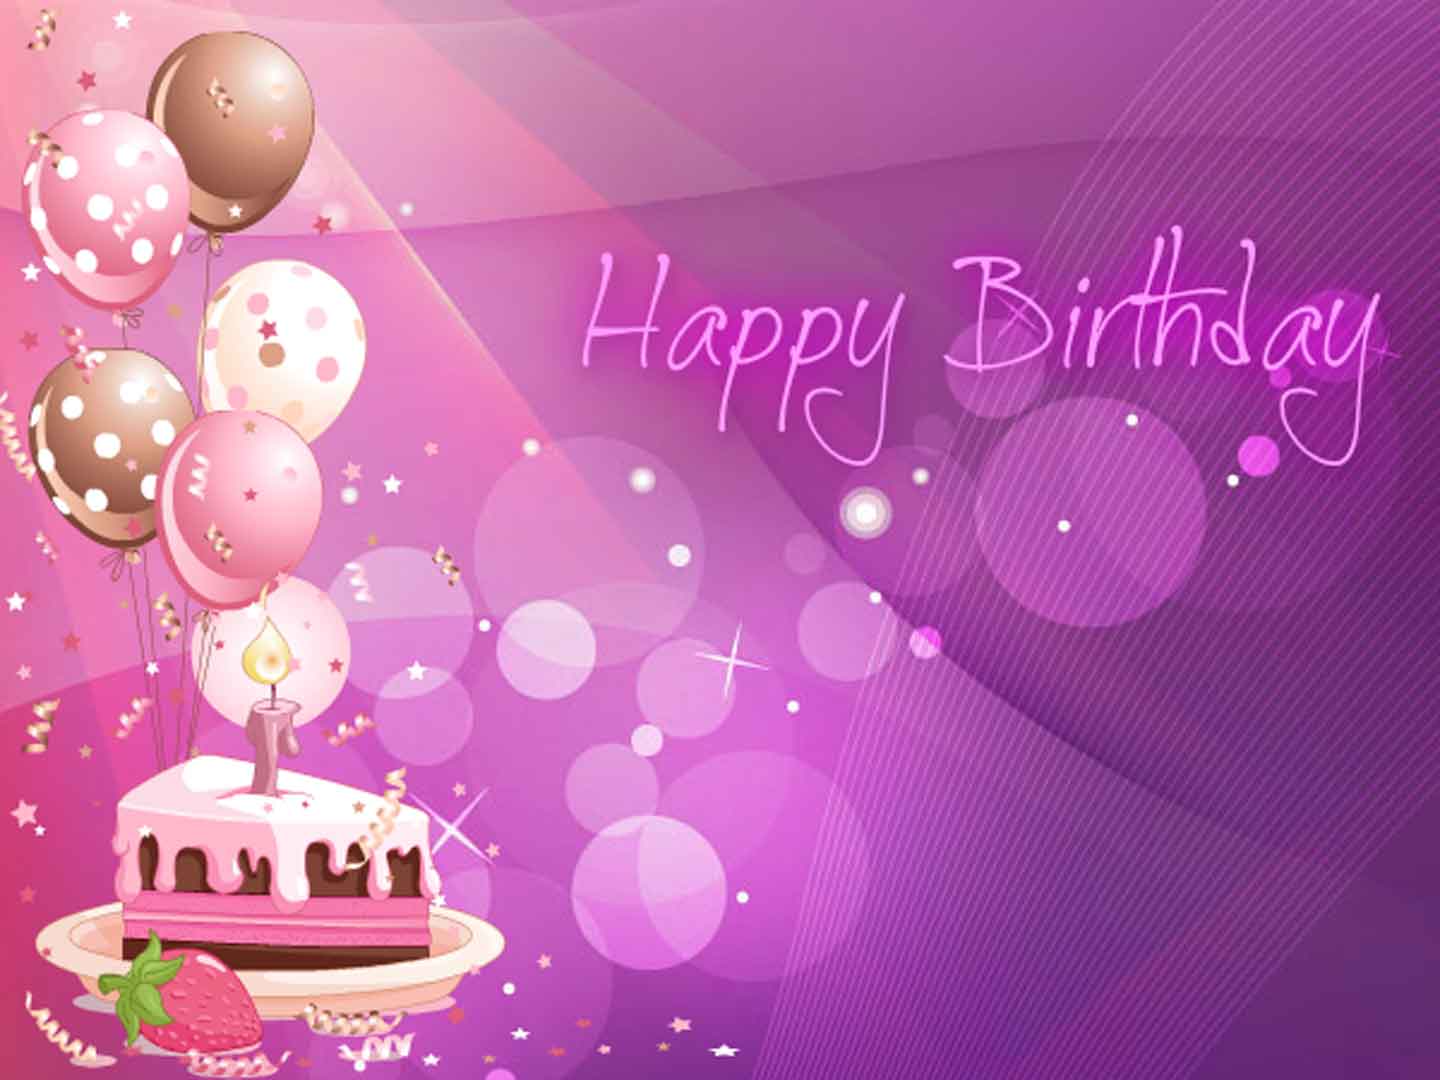 Happy Birthday Wallpapers HD